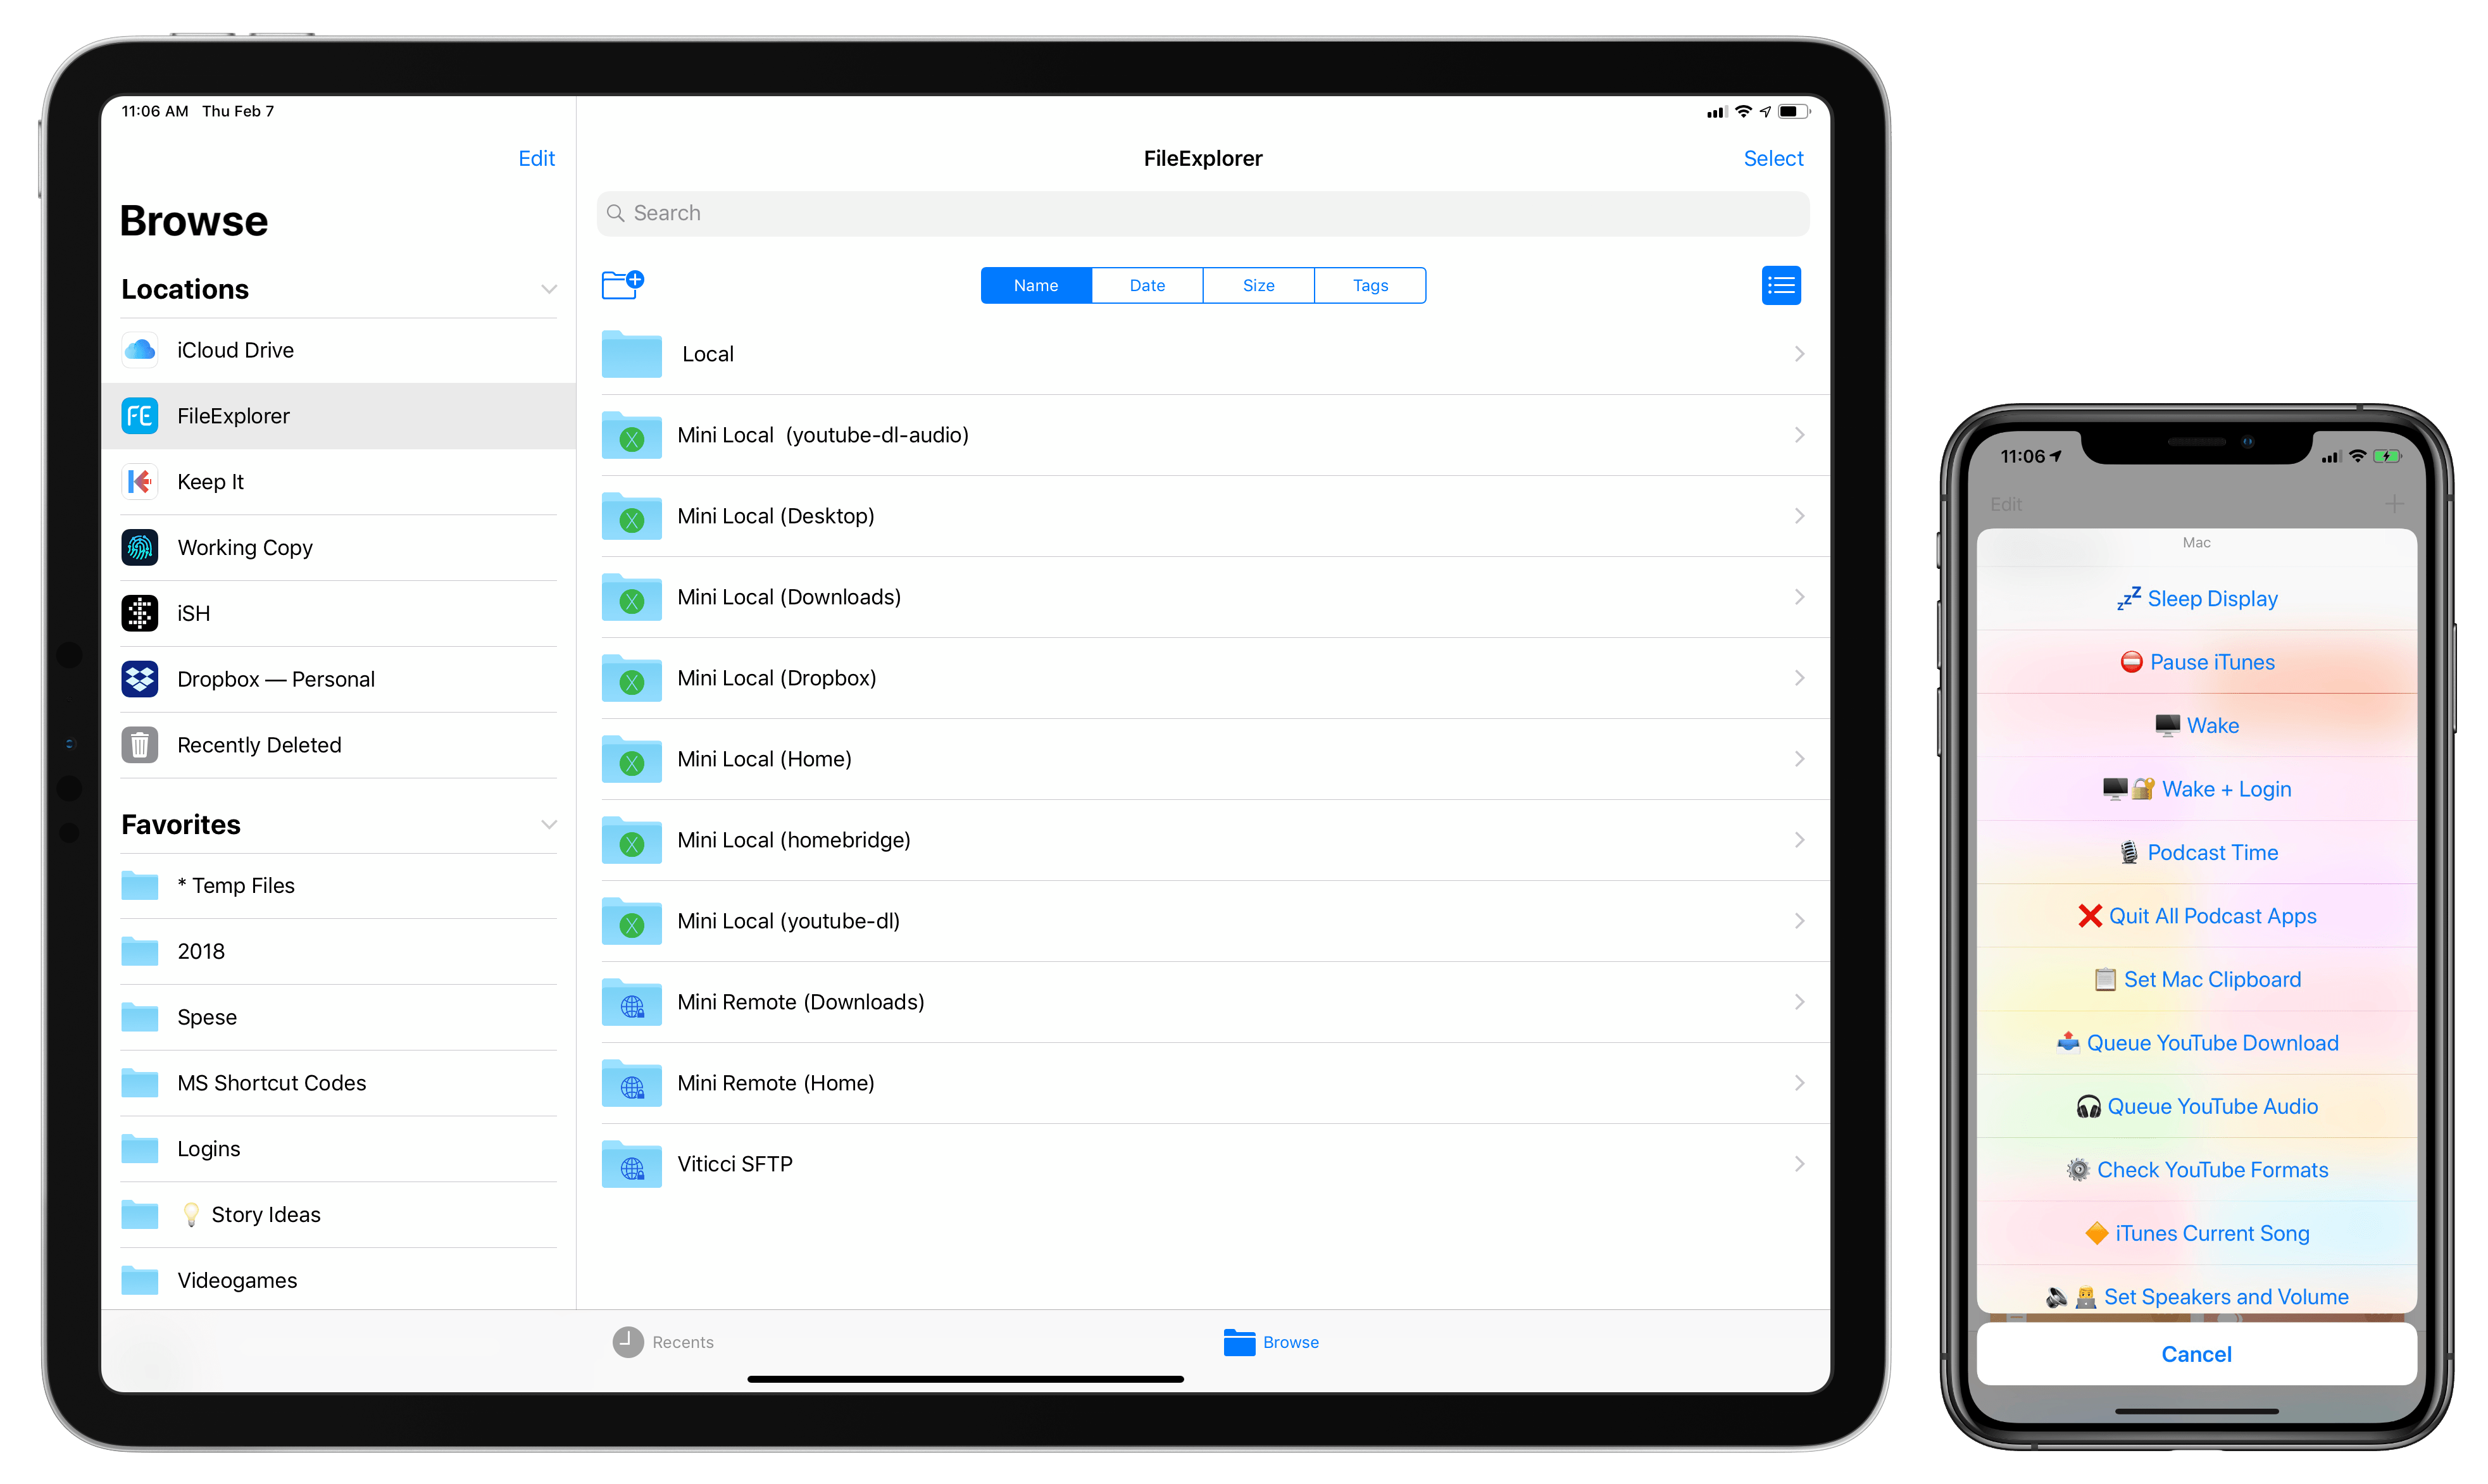 Mac formats supported by photos apps